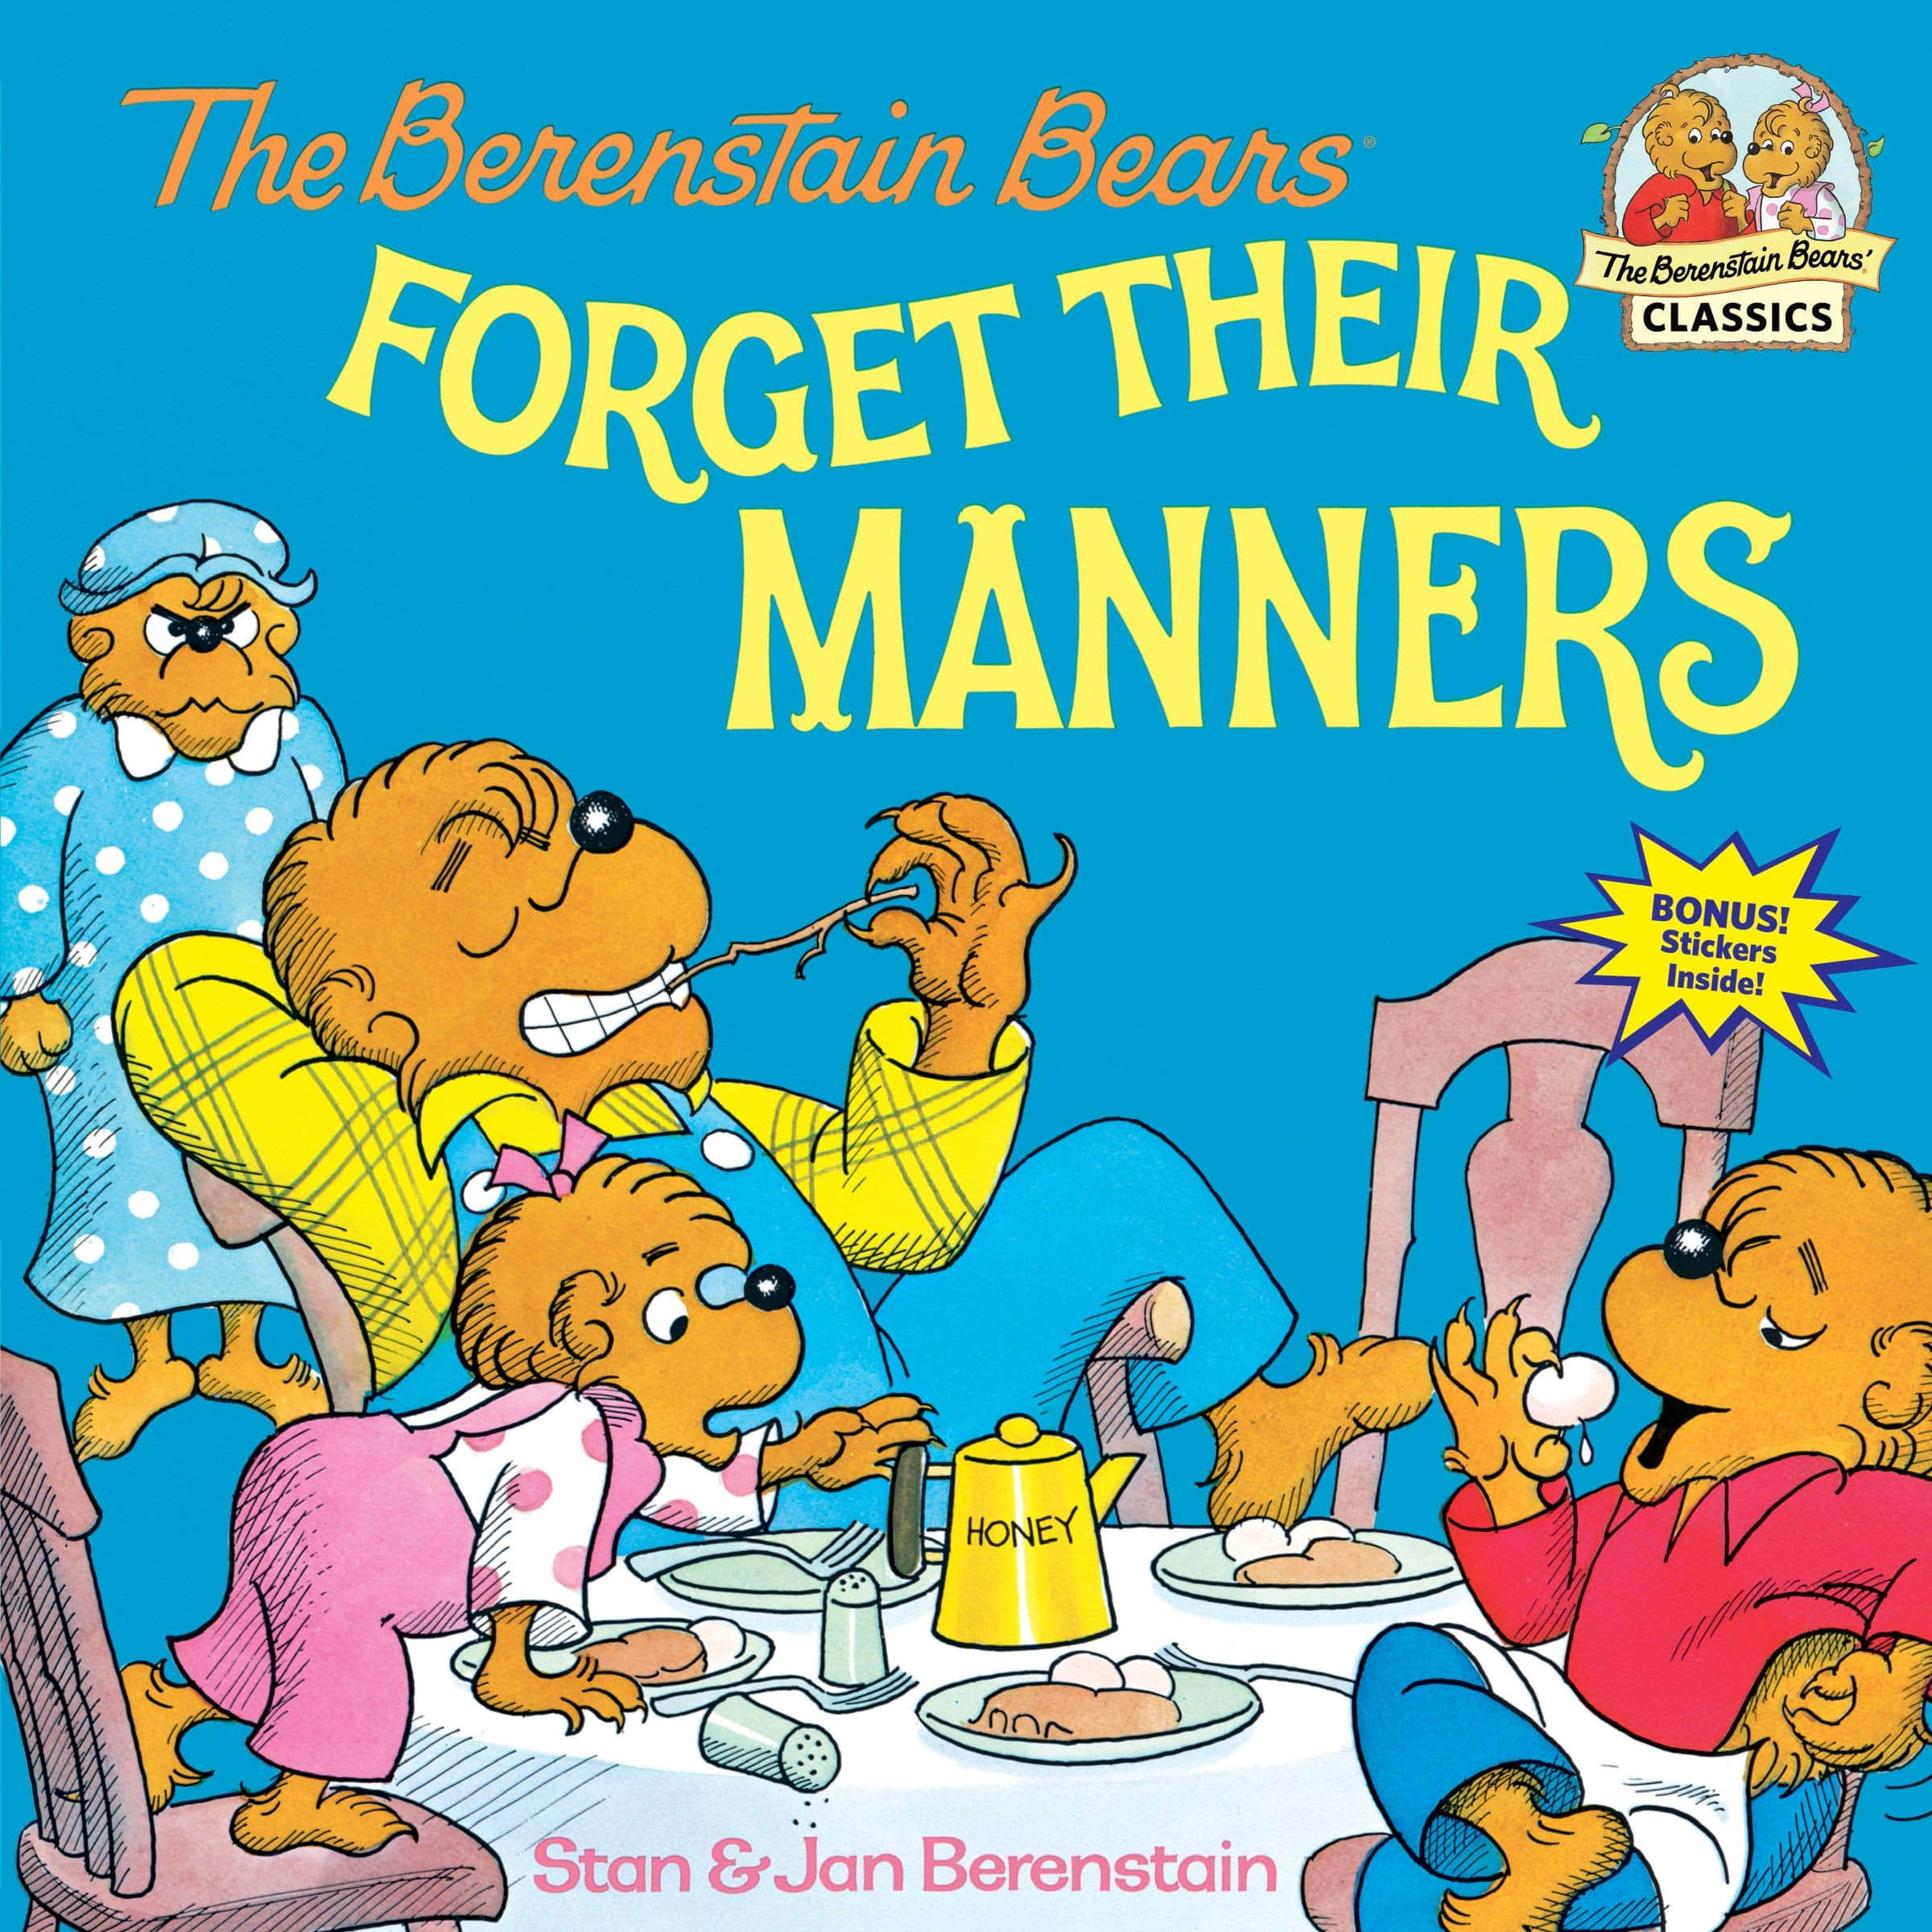 IMG : The Berenstain Bears forget their manners